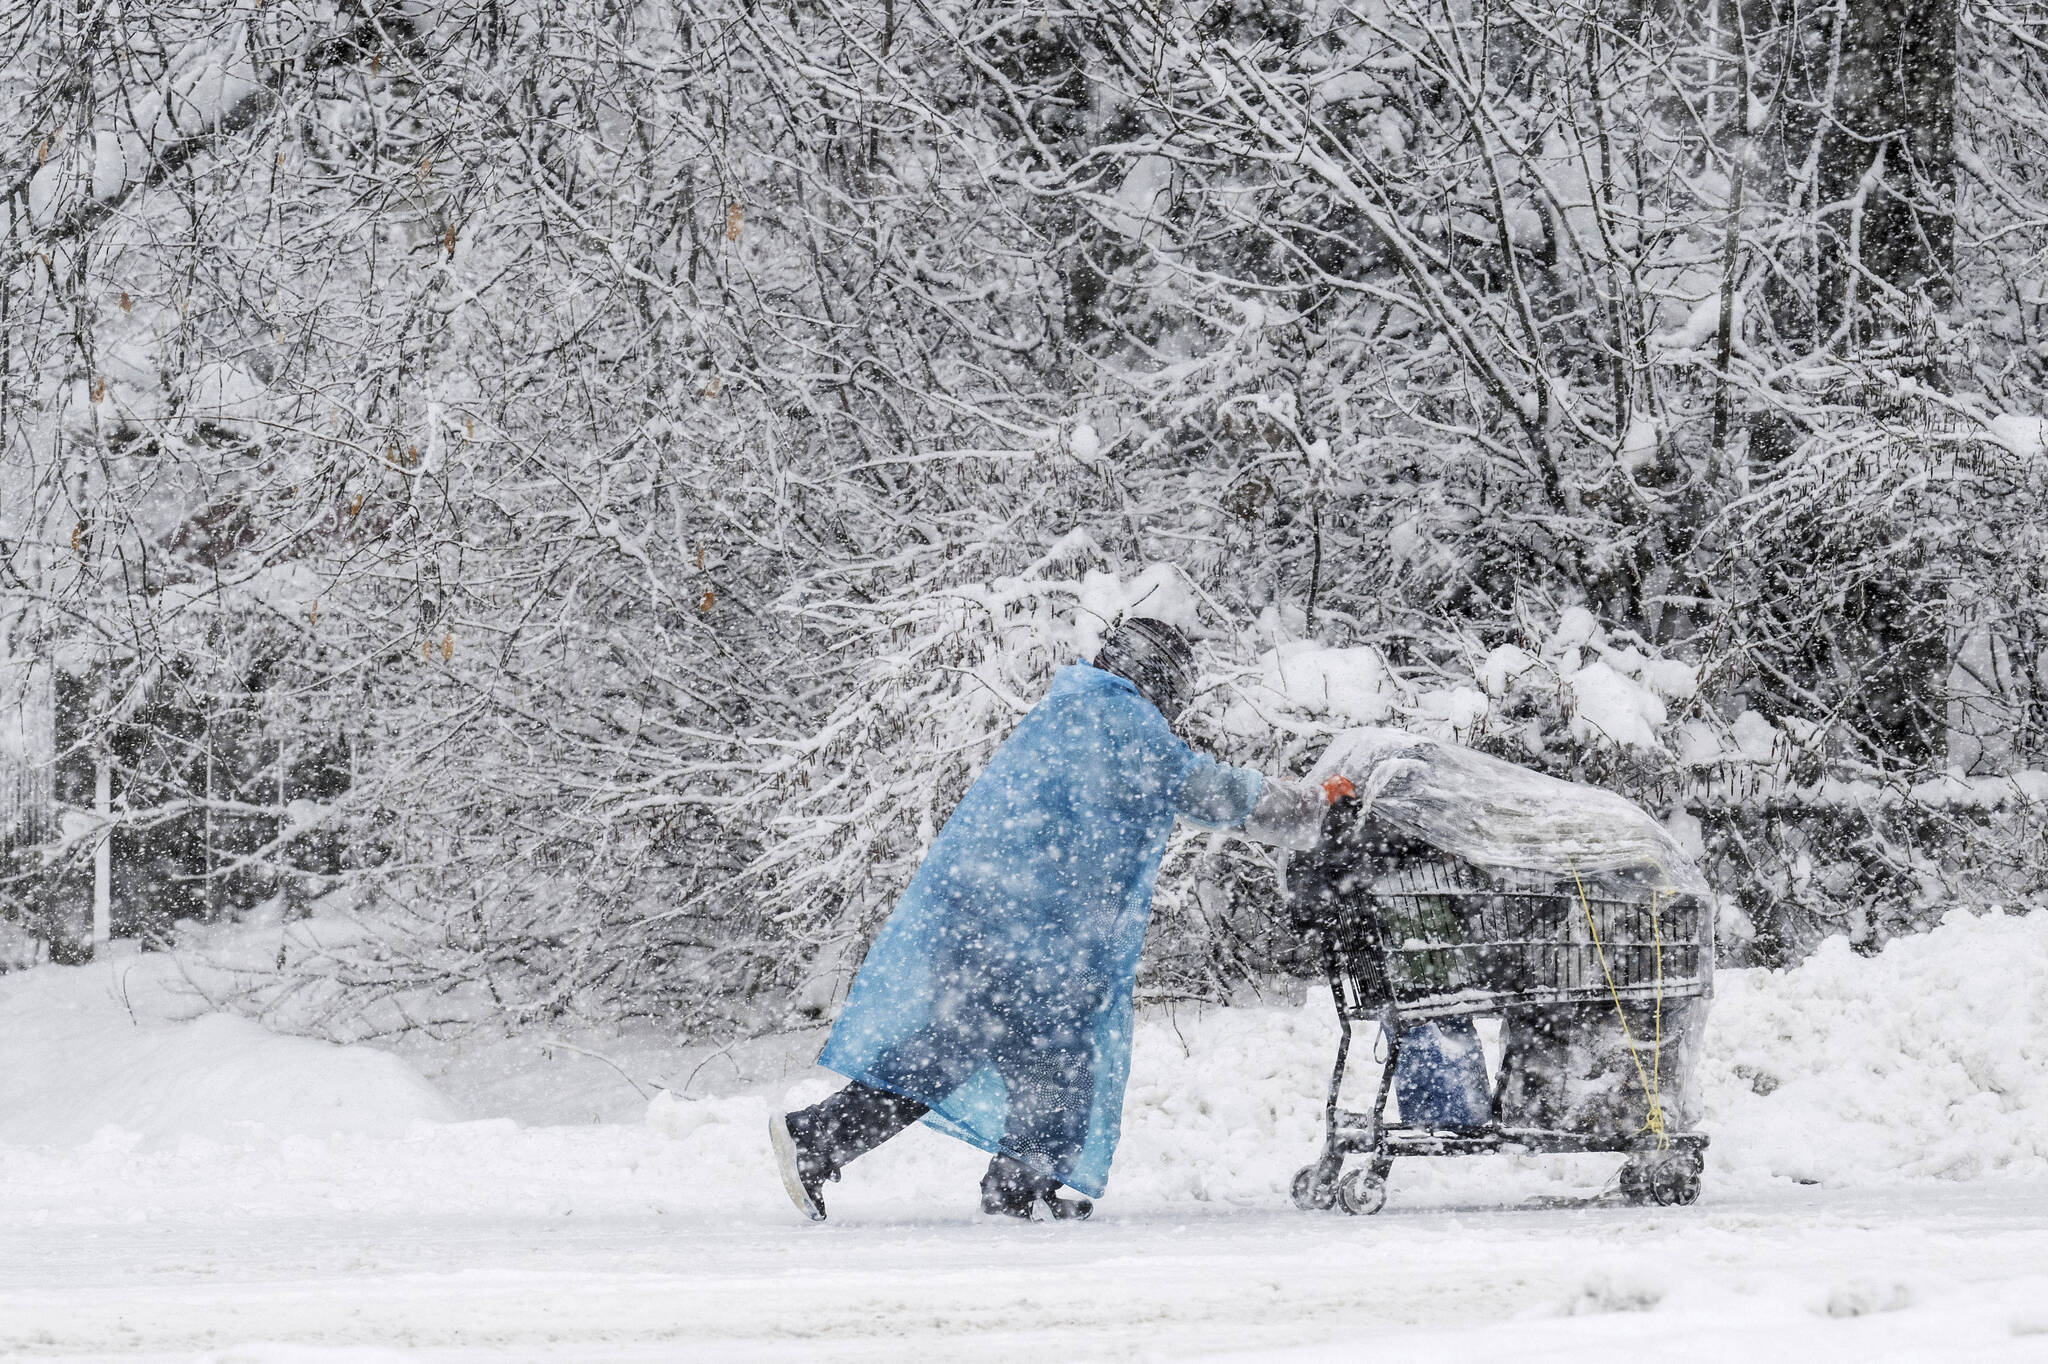 A pedestrian pushes a shopping cart on Cordova Street during a heavy snowfall on Thursday in Anchorage. Four homeless people have died in Anchorage in the last week, underscoring the city’s ongoing struggle to house a large houseless population at the same time winter weather has returned, with more than 2 feet (0.61 meters) of snow falling within 48 hours. (Marc Lester/Anchorage Daily News via AP)